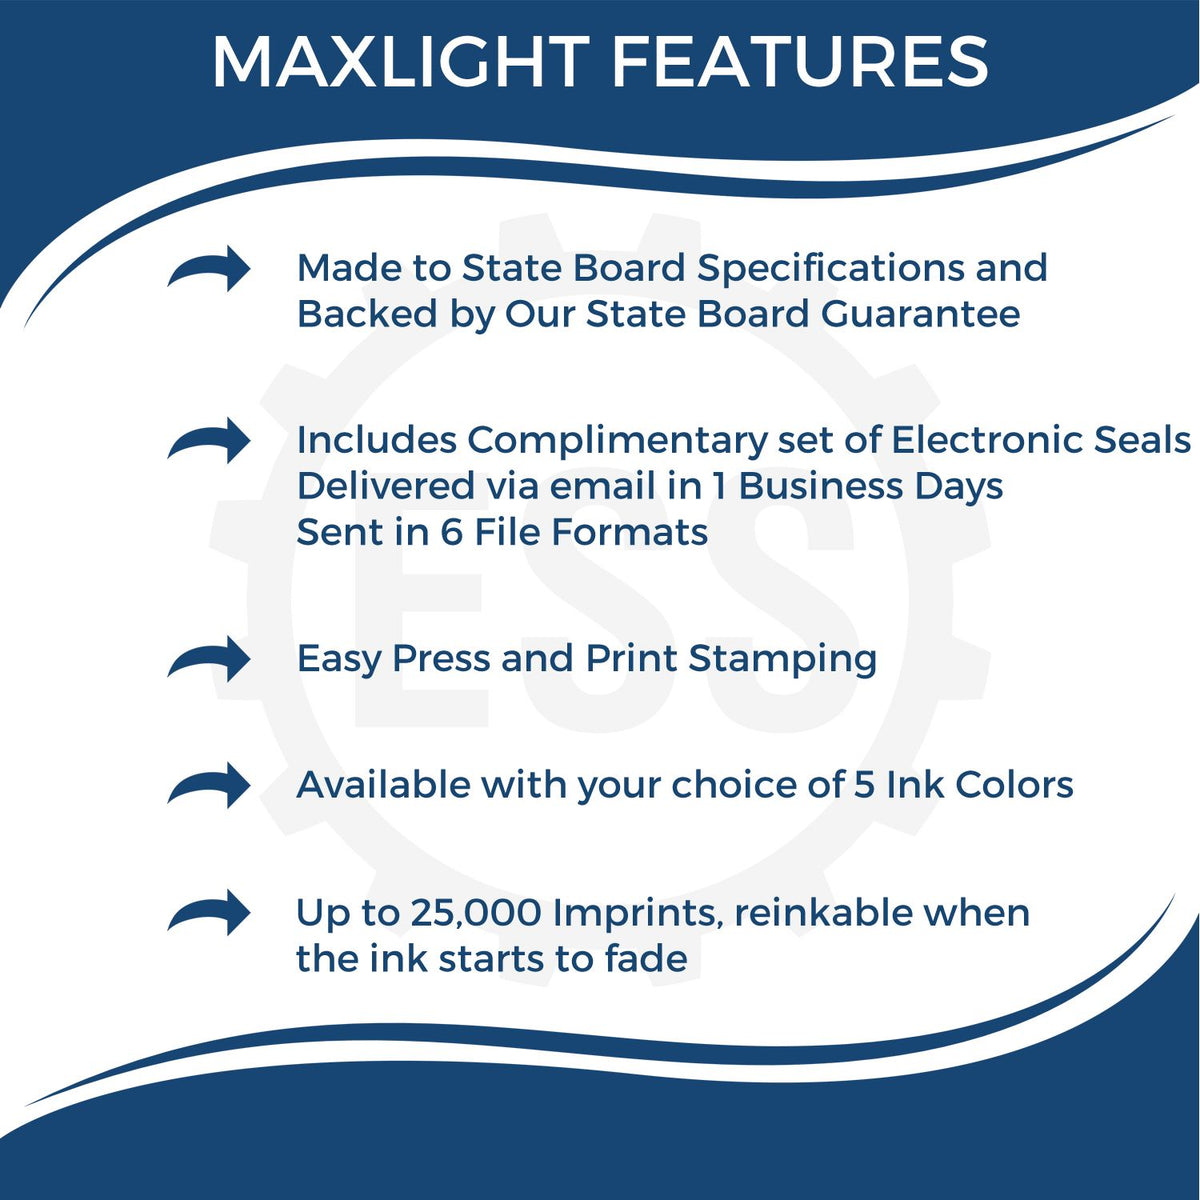 A picture of an infographic highlighting the selling points for the Premium MaxLight Pre-Inked New Hampshire Geology Stamp